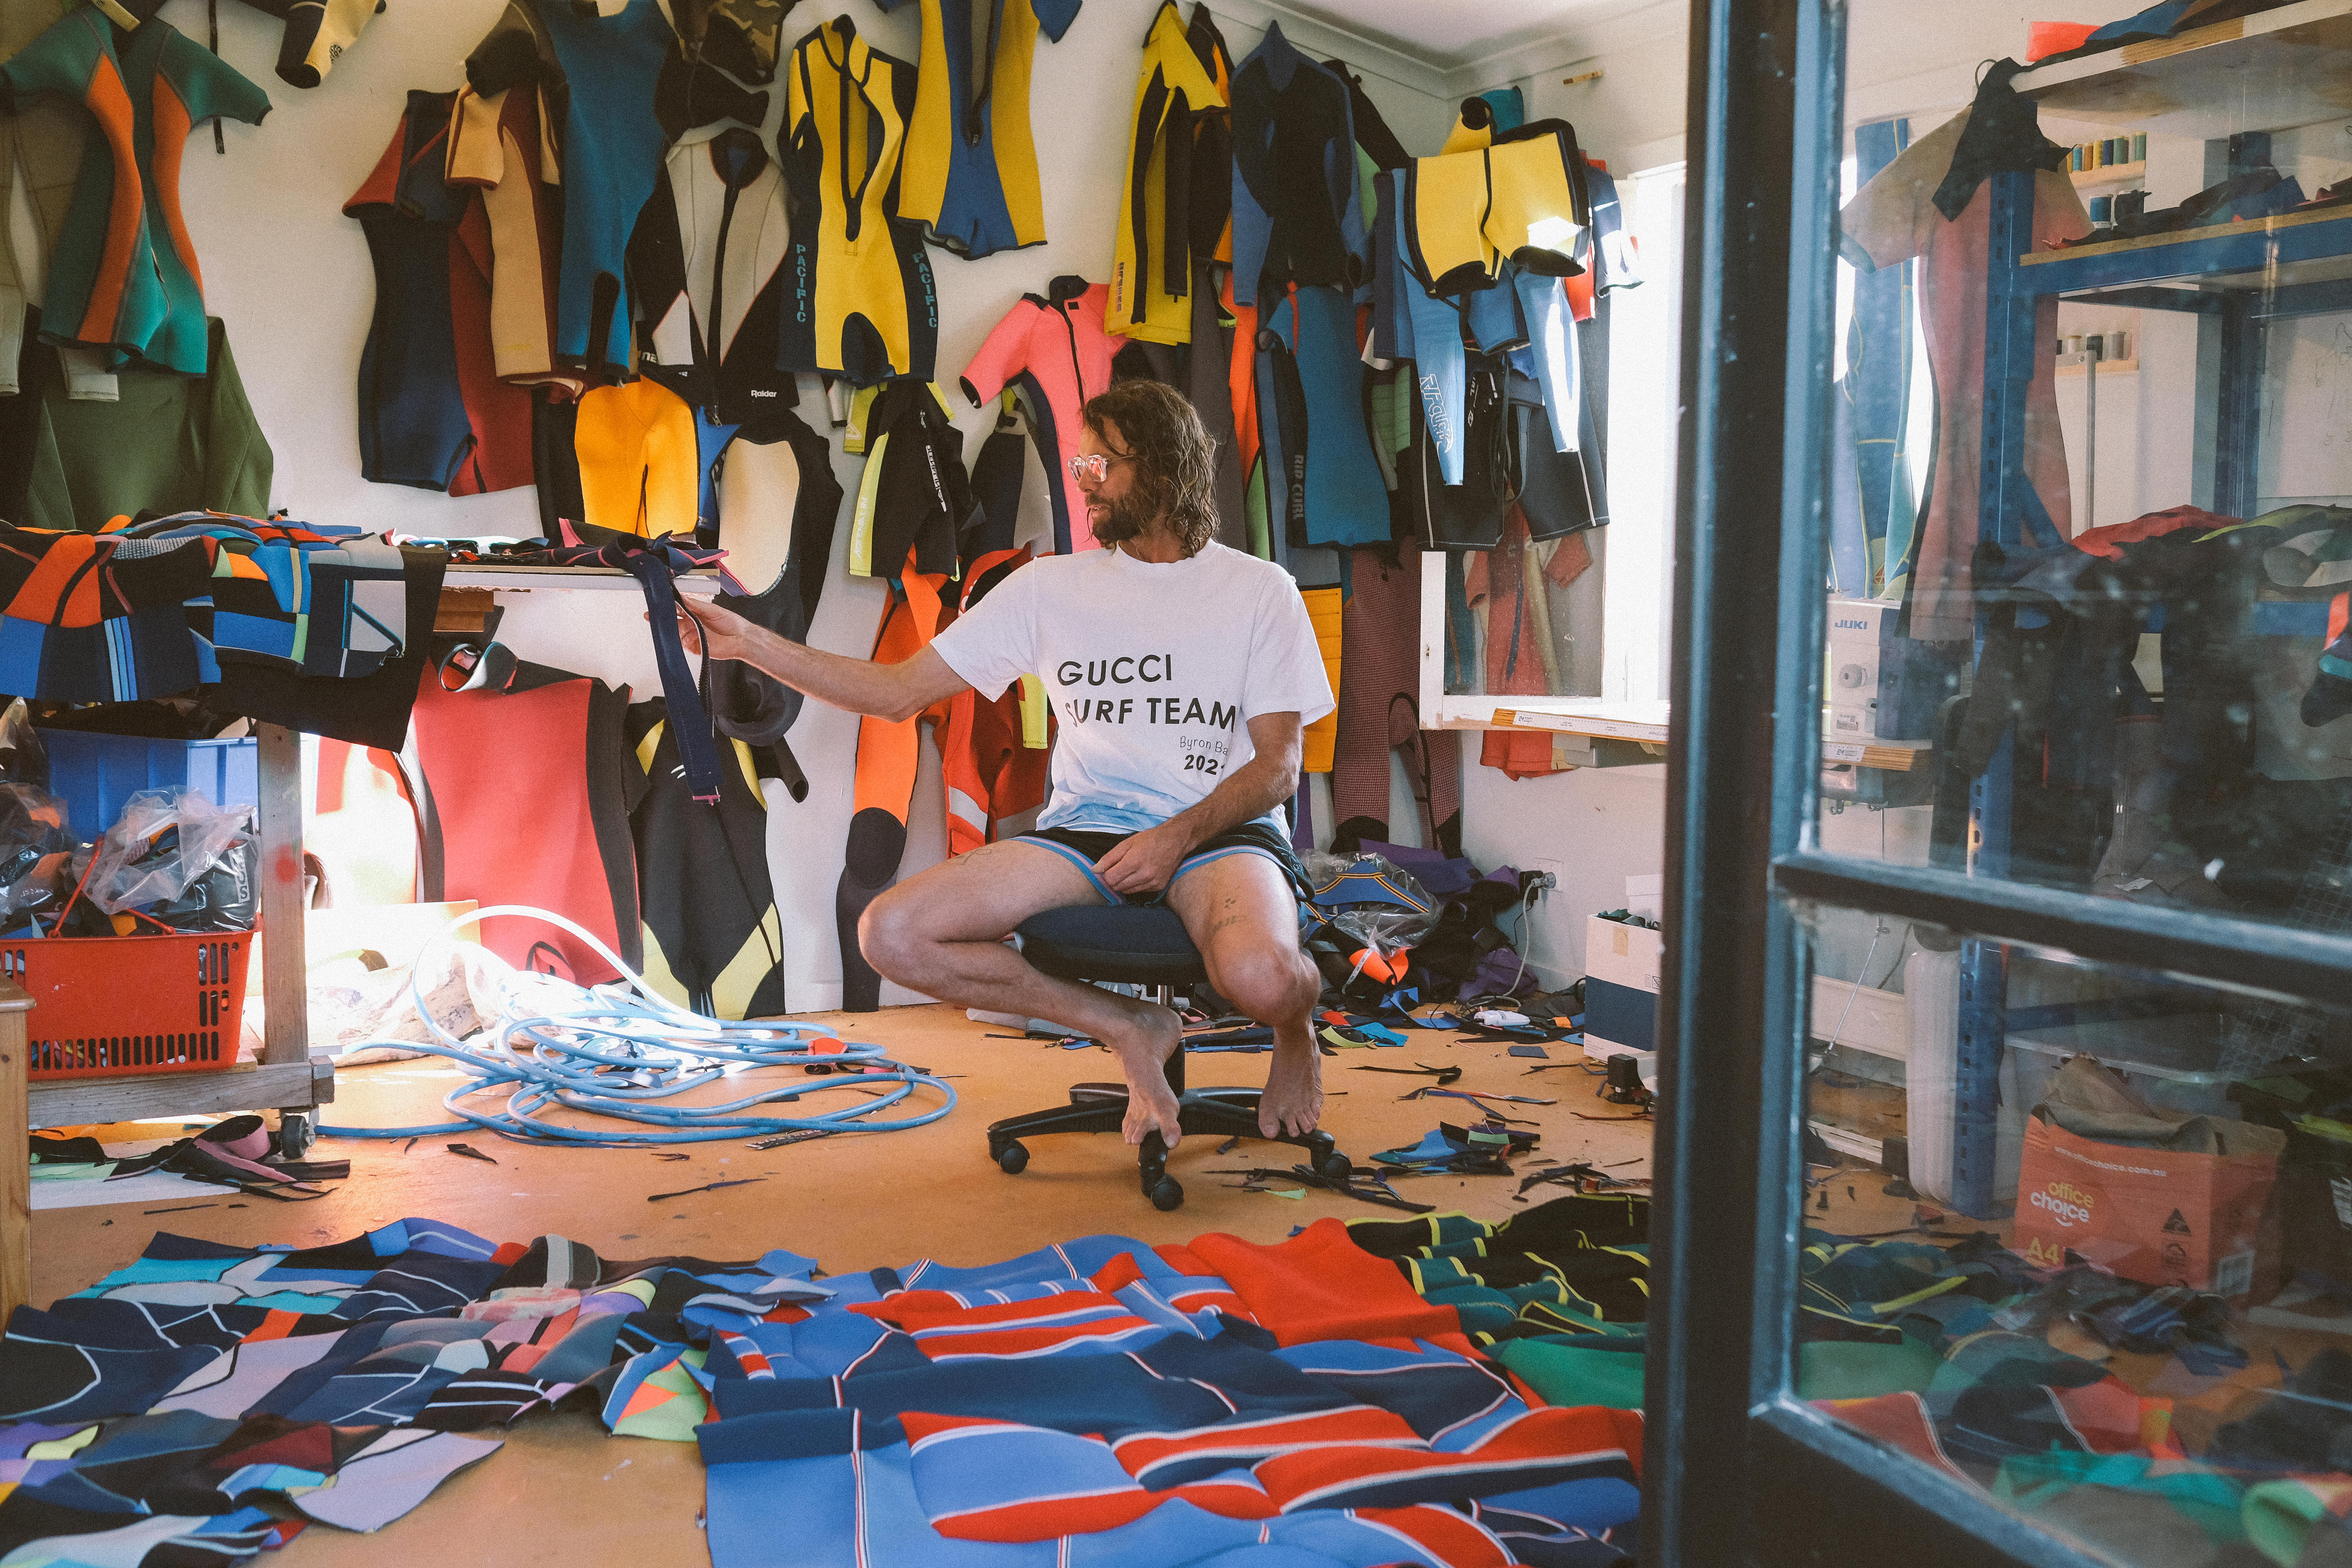 Artists sits in his studio surrounded by wetsuits and artworks in progress